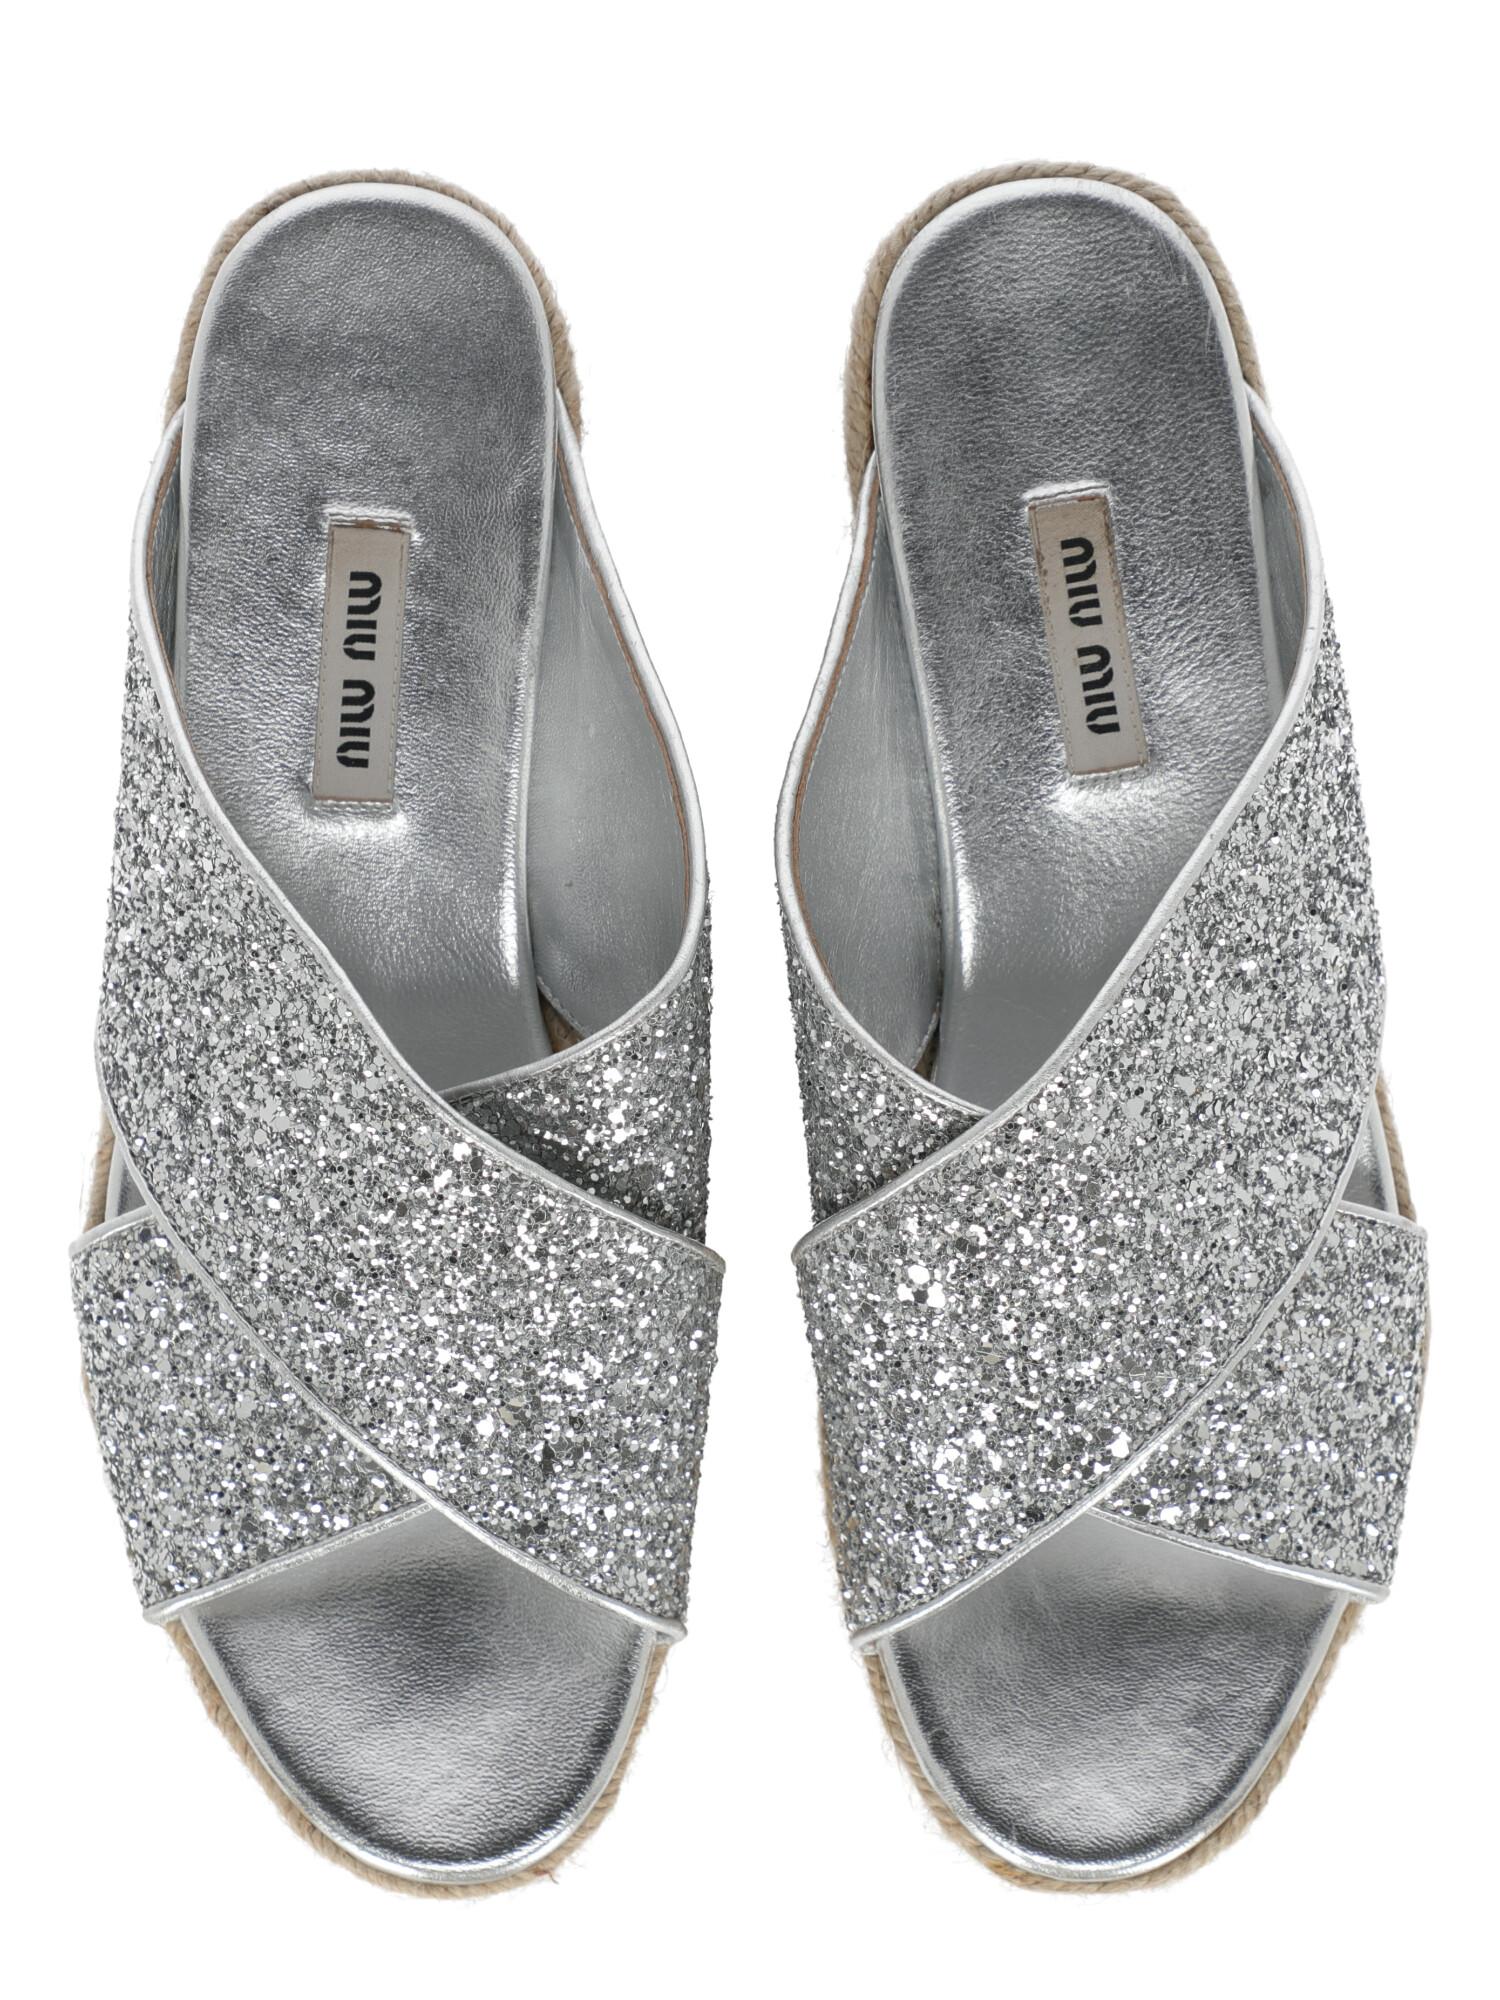 Miu Miu  Women   Wedges  Silver Leather EU 39 In Good Condition For Sale In Milan, IT